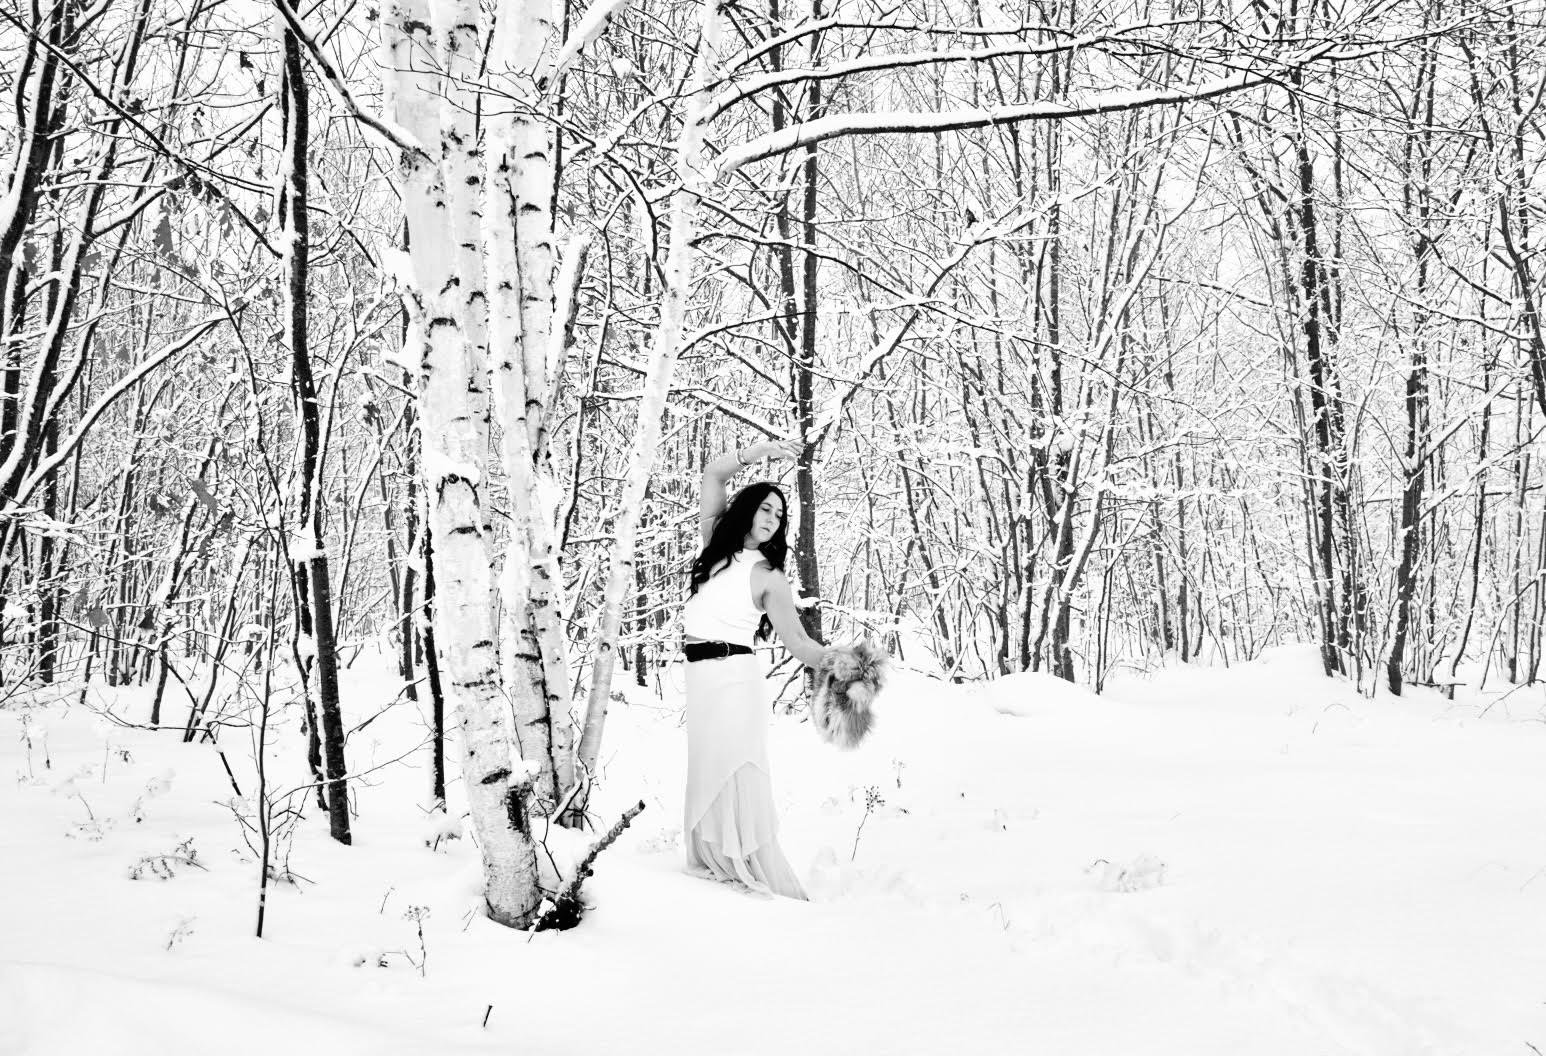 To Wear Light, Everlasting │hearing birch-song in winter │ Bayfield, WI